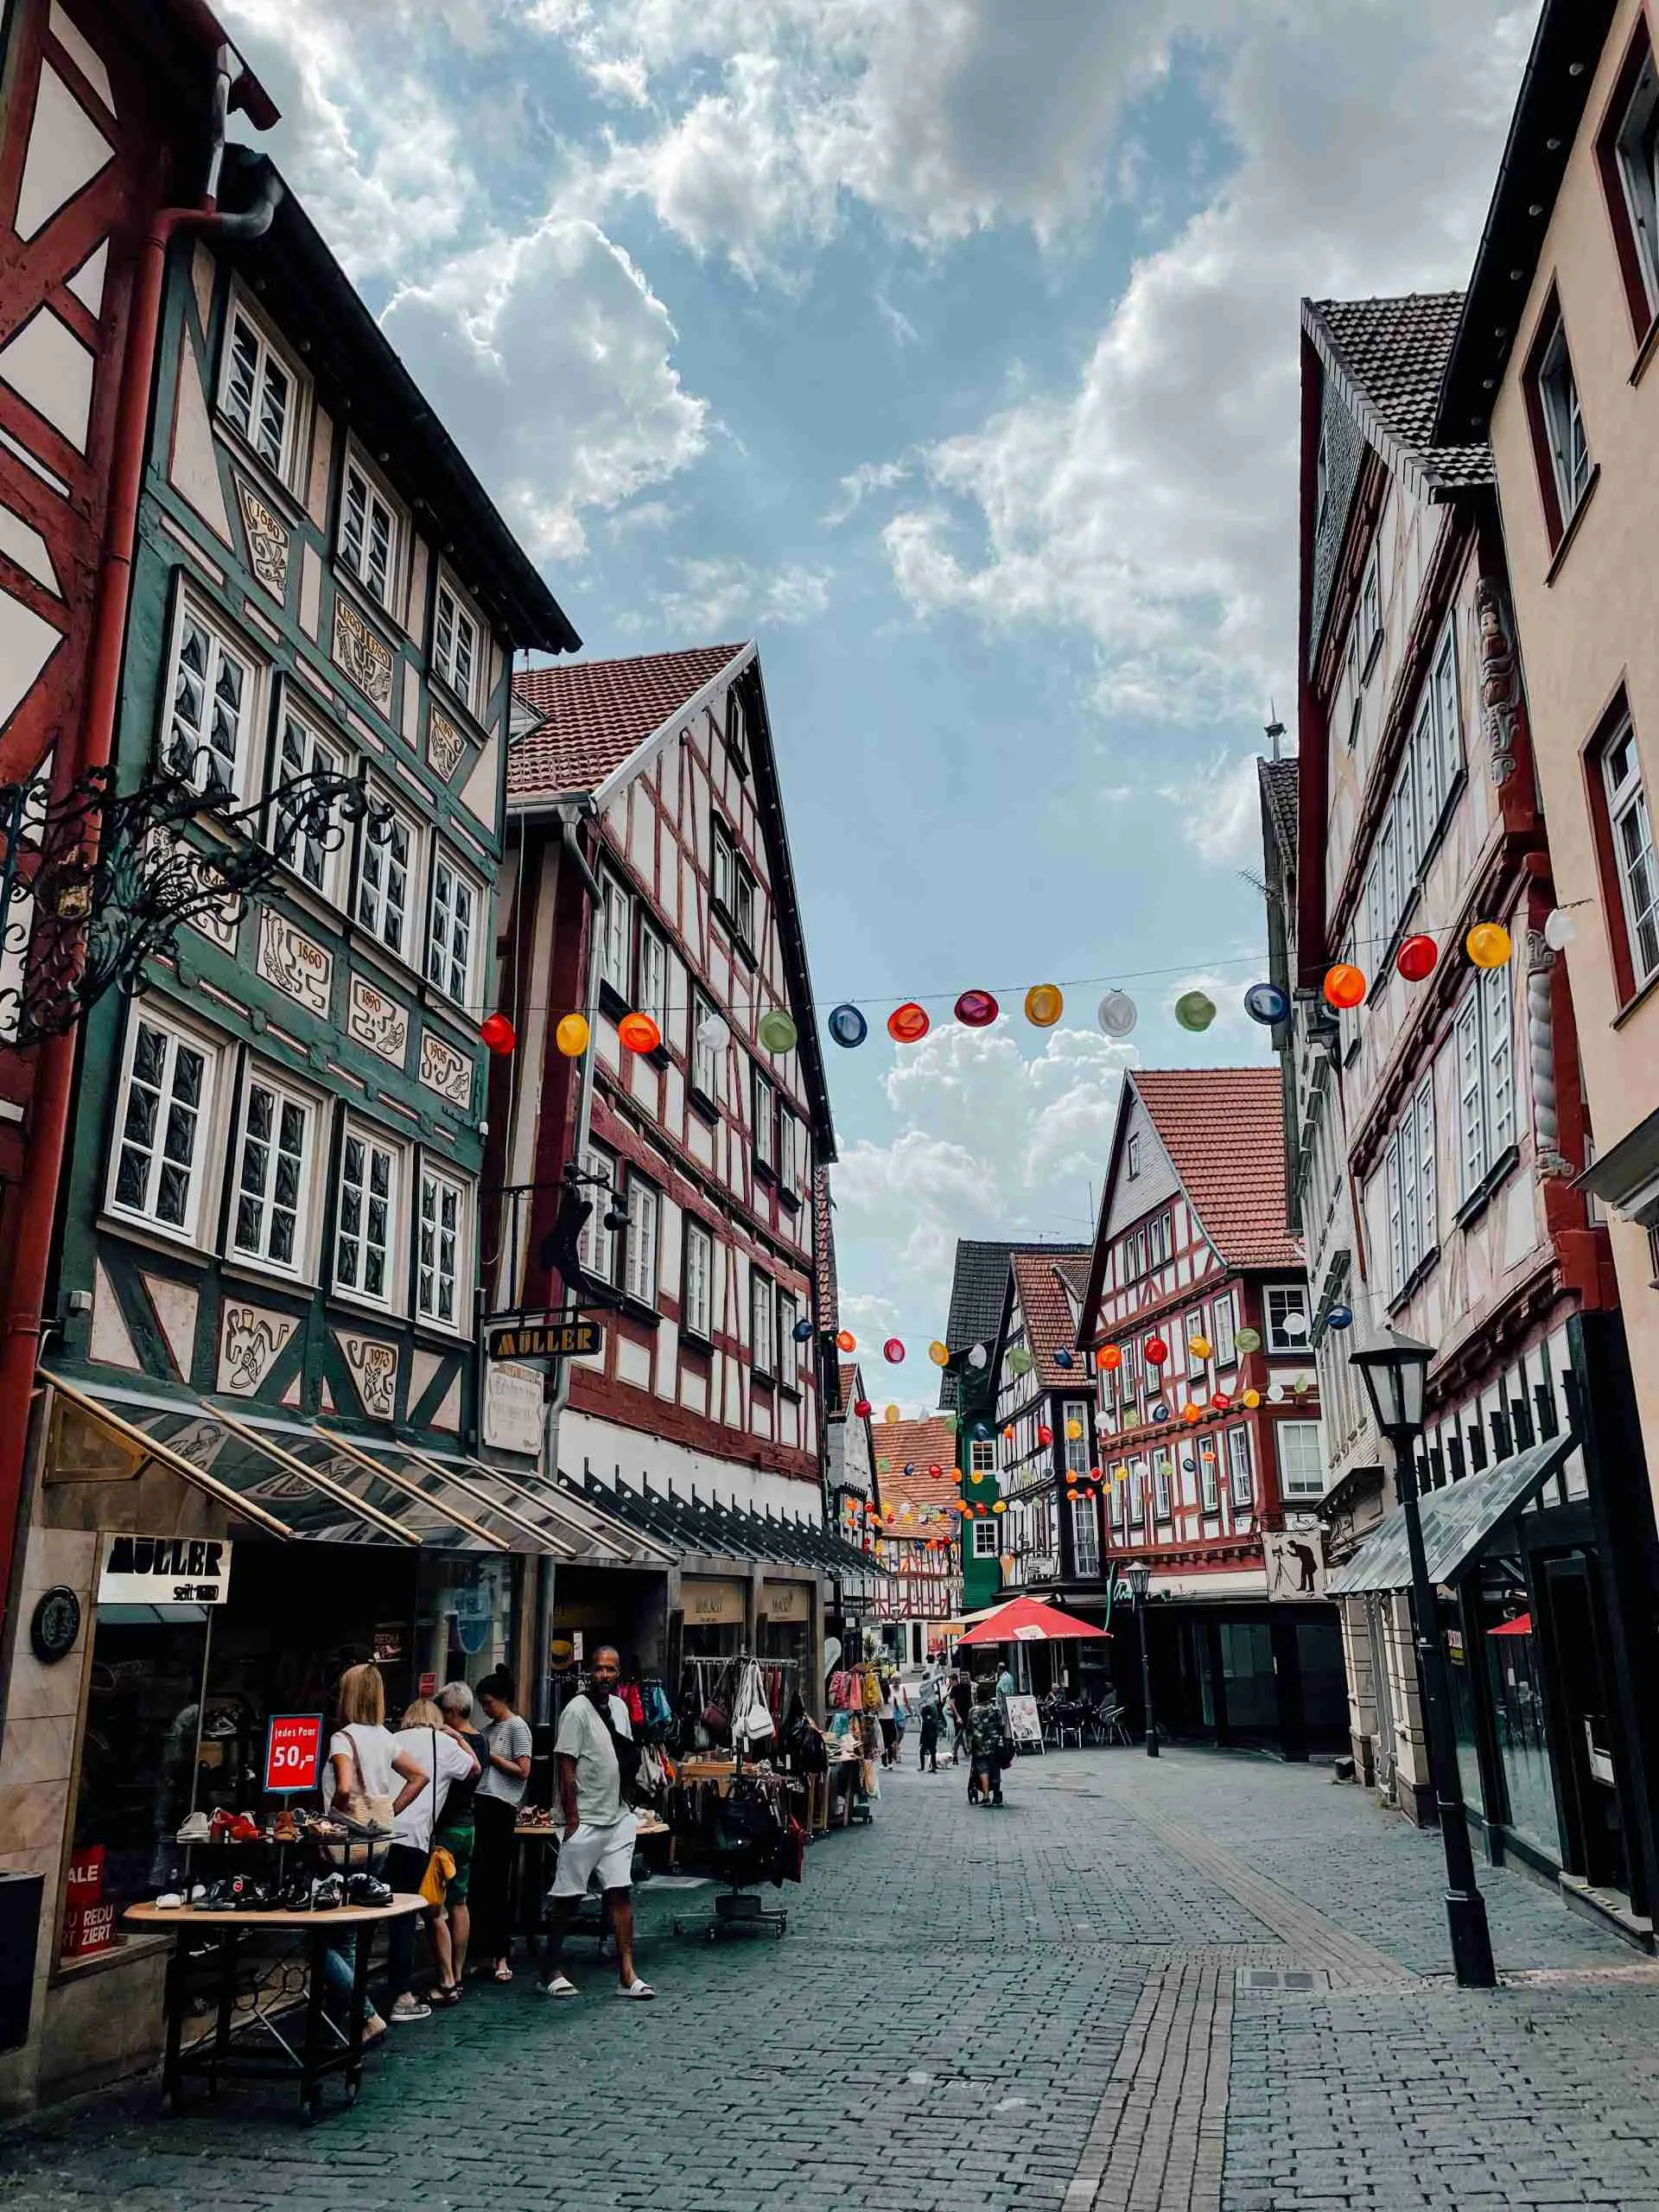 The timber-framed colourful streets of Alsfeld 